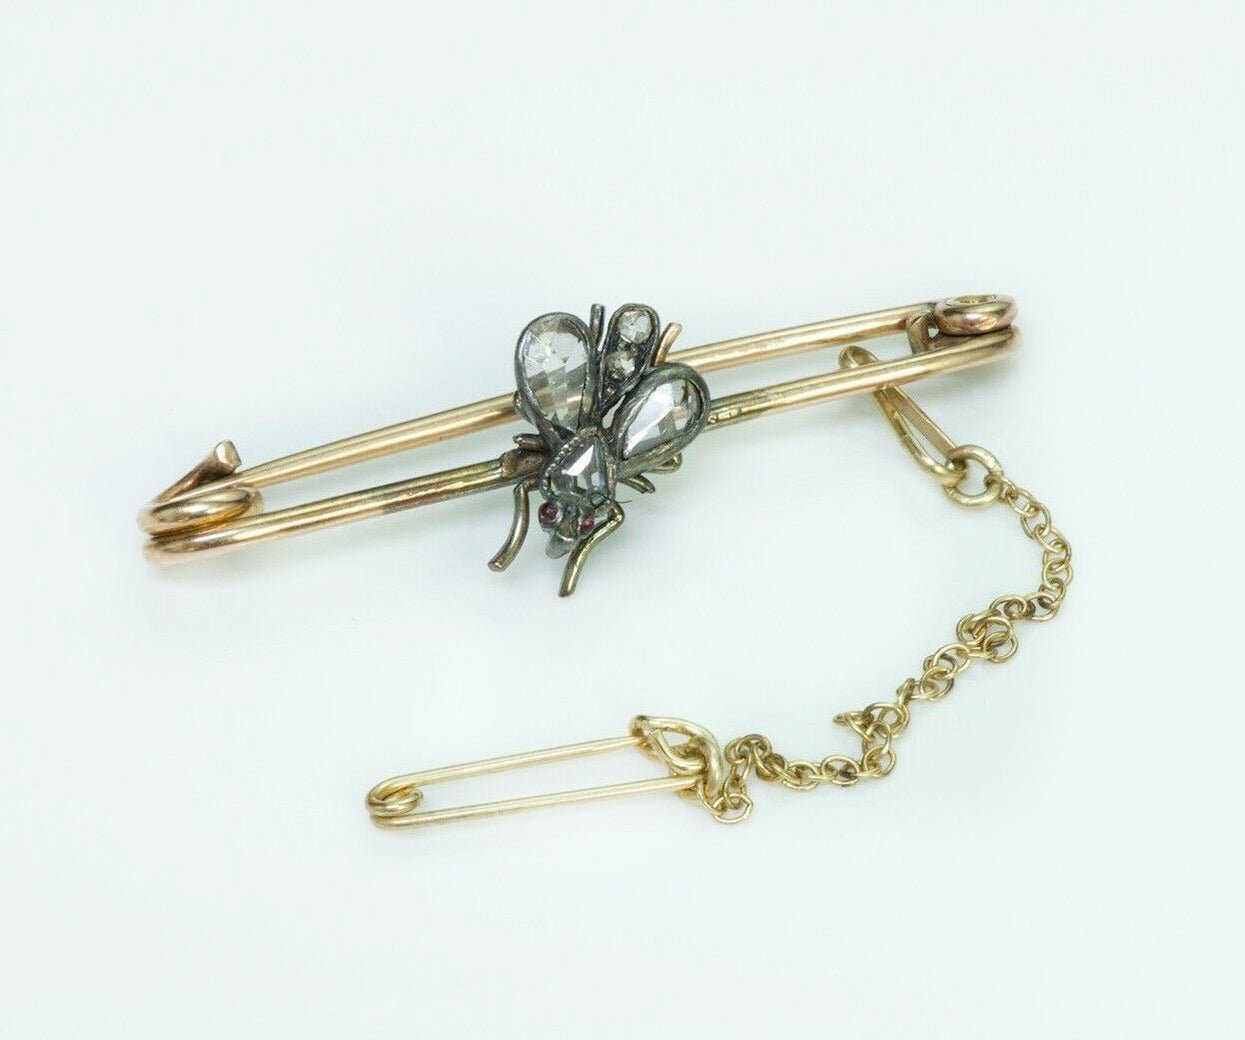 Antique Fly Yellow Gold Diamond Brooch Pin